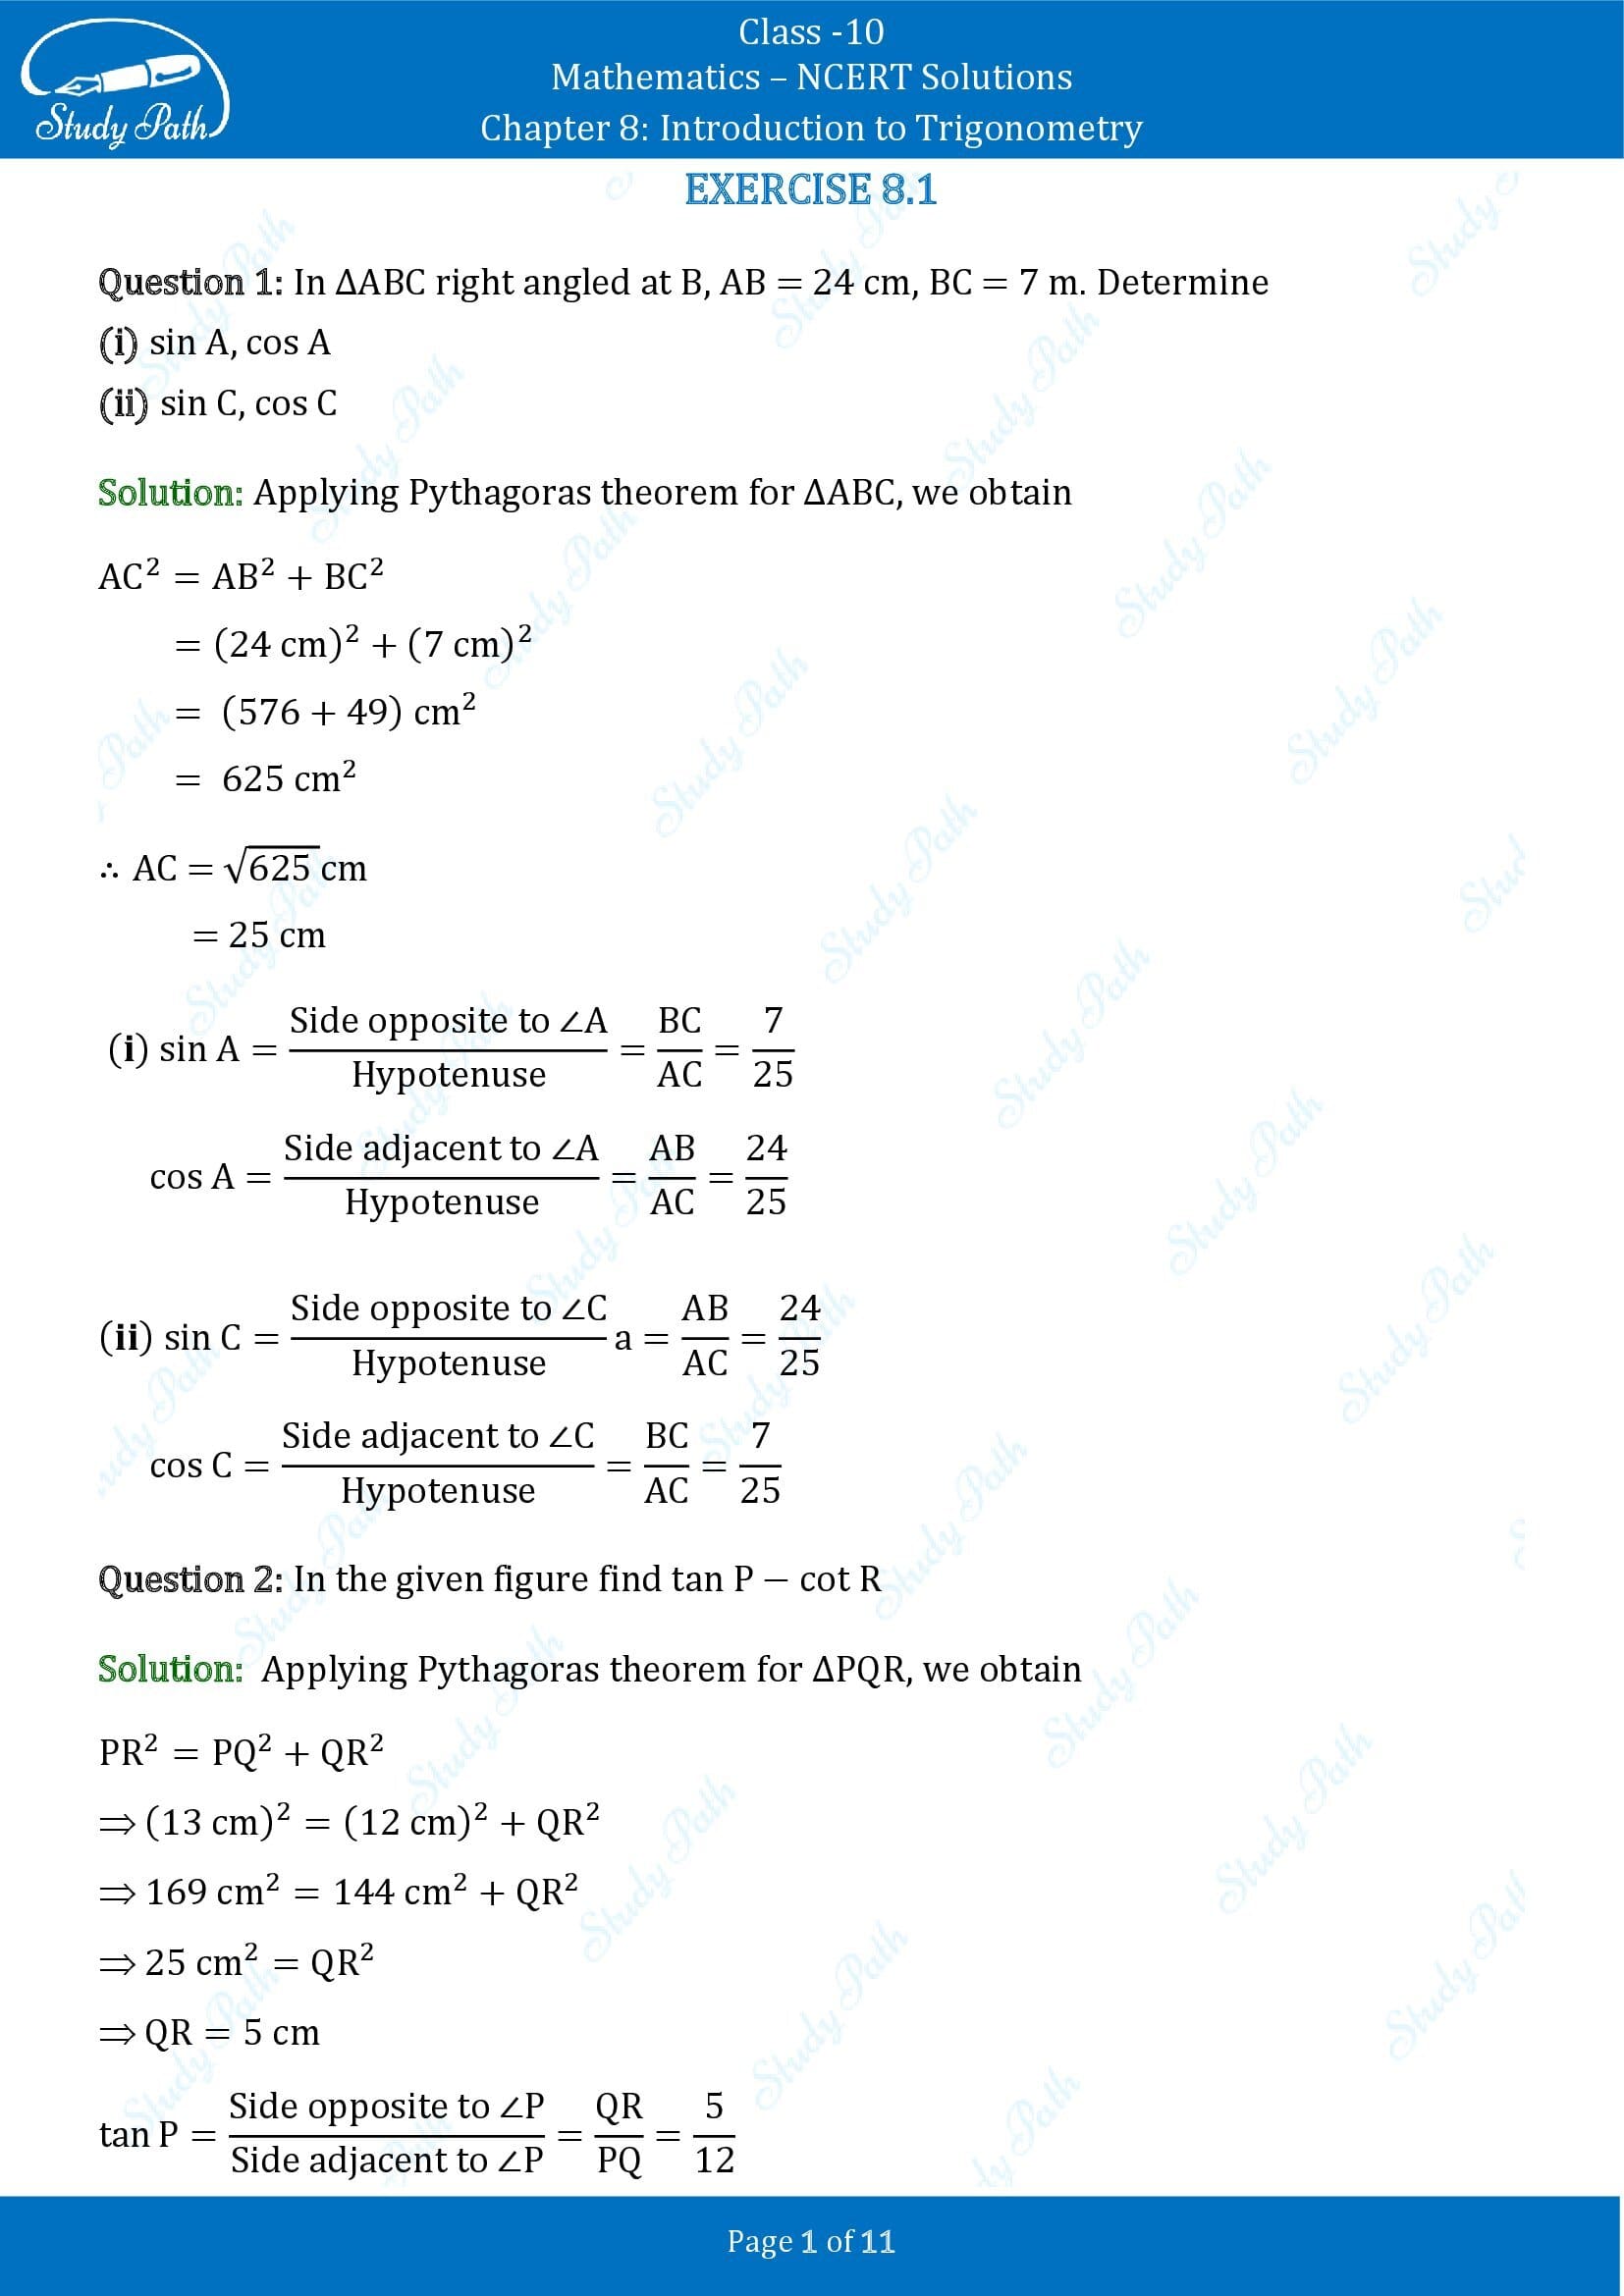 NCERT Solutions for Class 10 Maths Chapter 8 Introduction to Trigonometry Exercise 8.1 00001